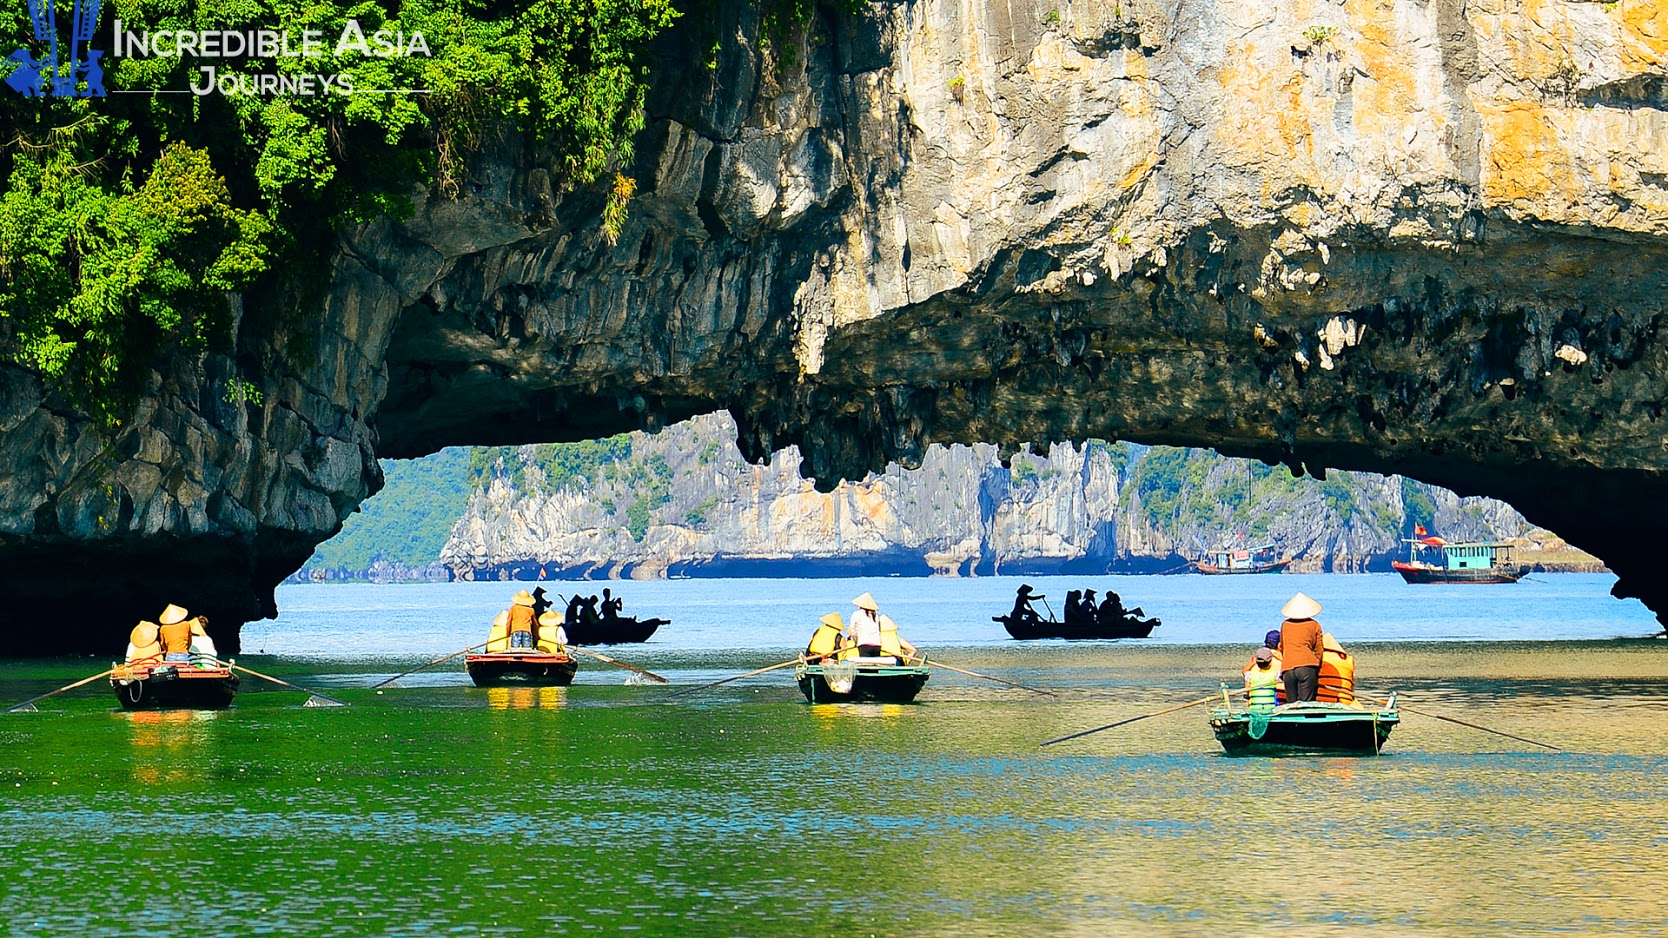 At Which Port do International Cruises Stop in Halong Bay?